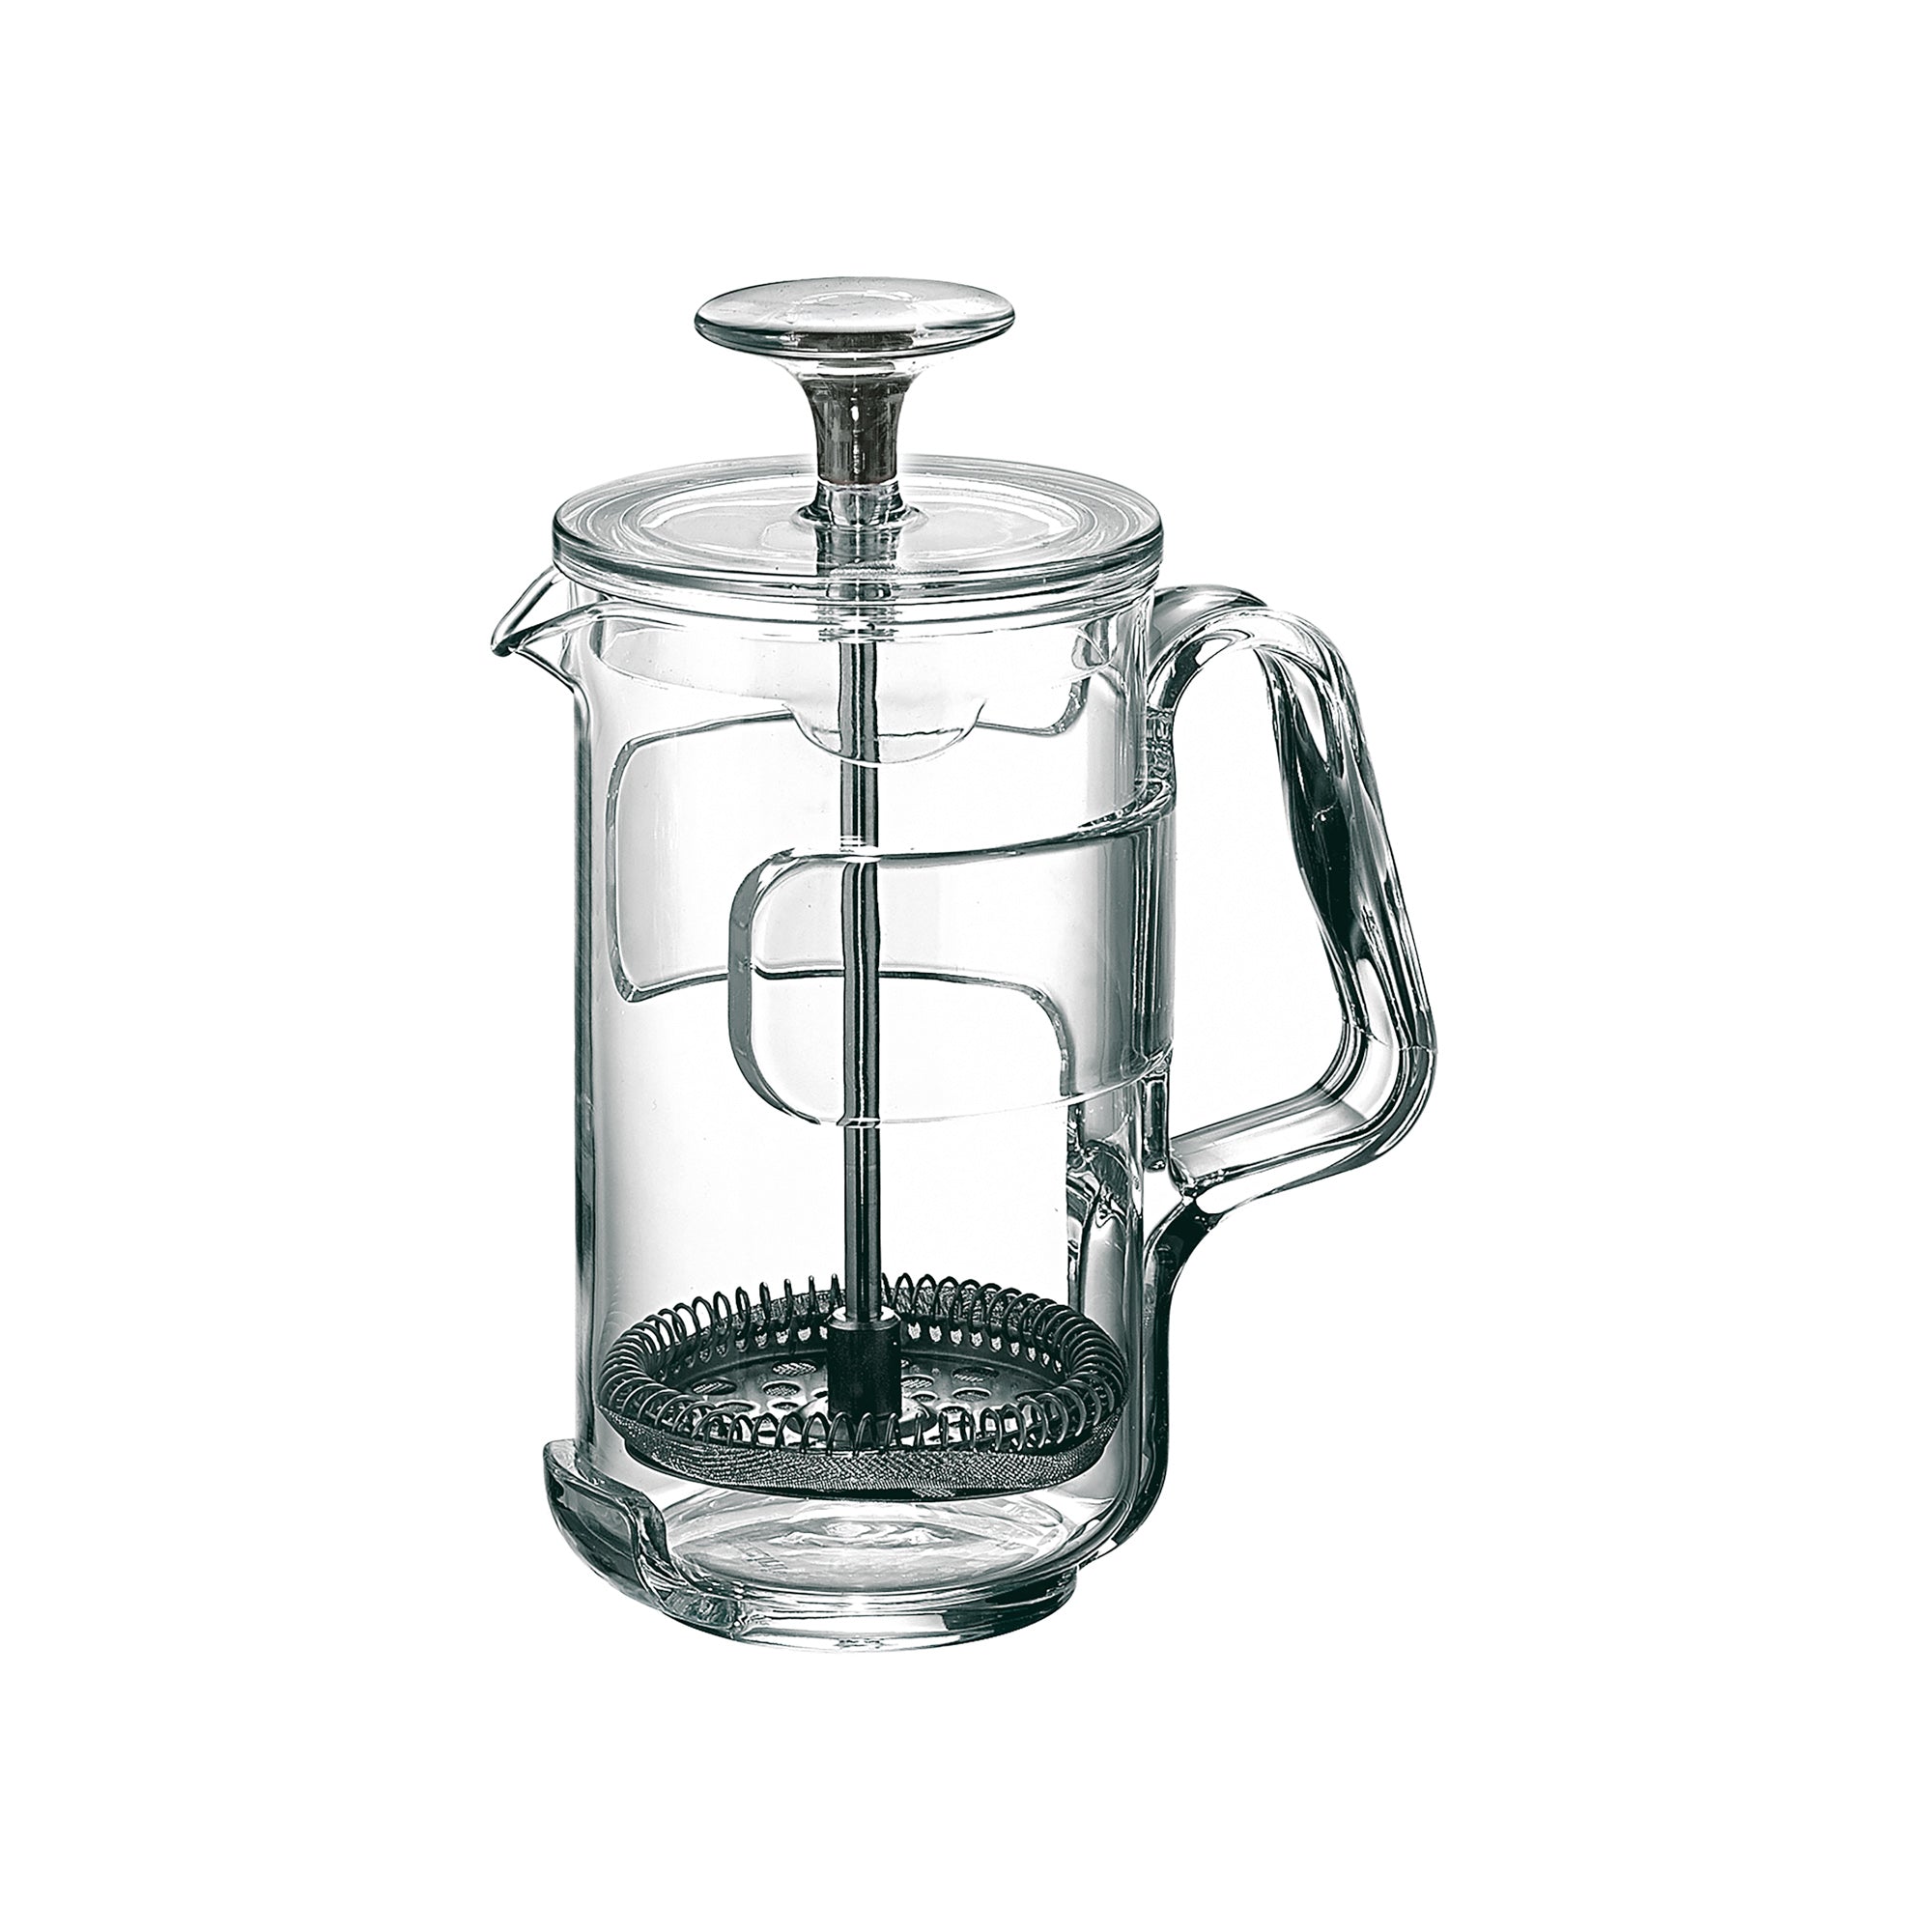 3-CUPS MULTISHAKER 'INFUSION' "EVERYDAY"